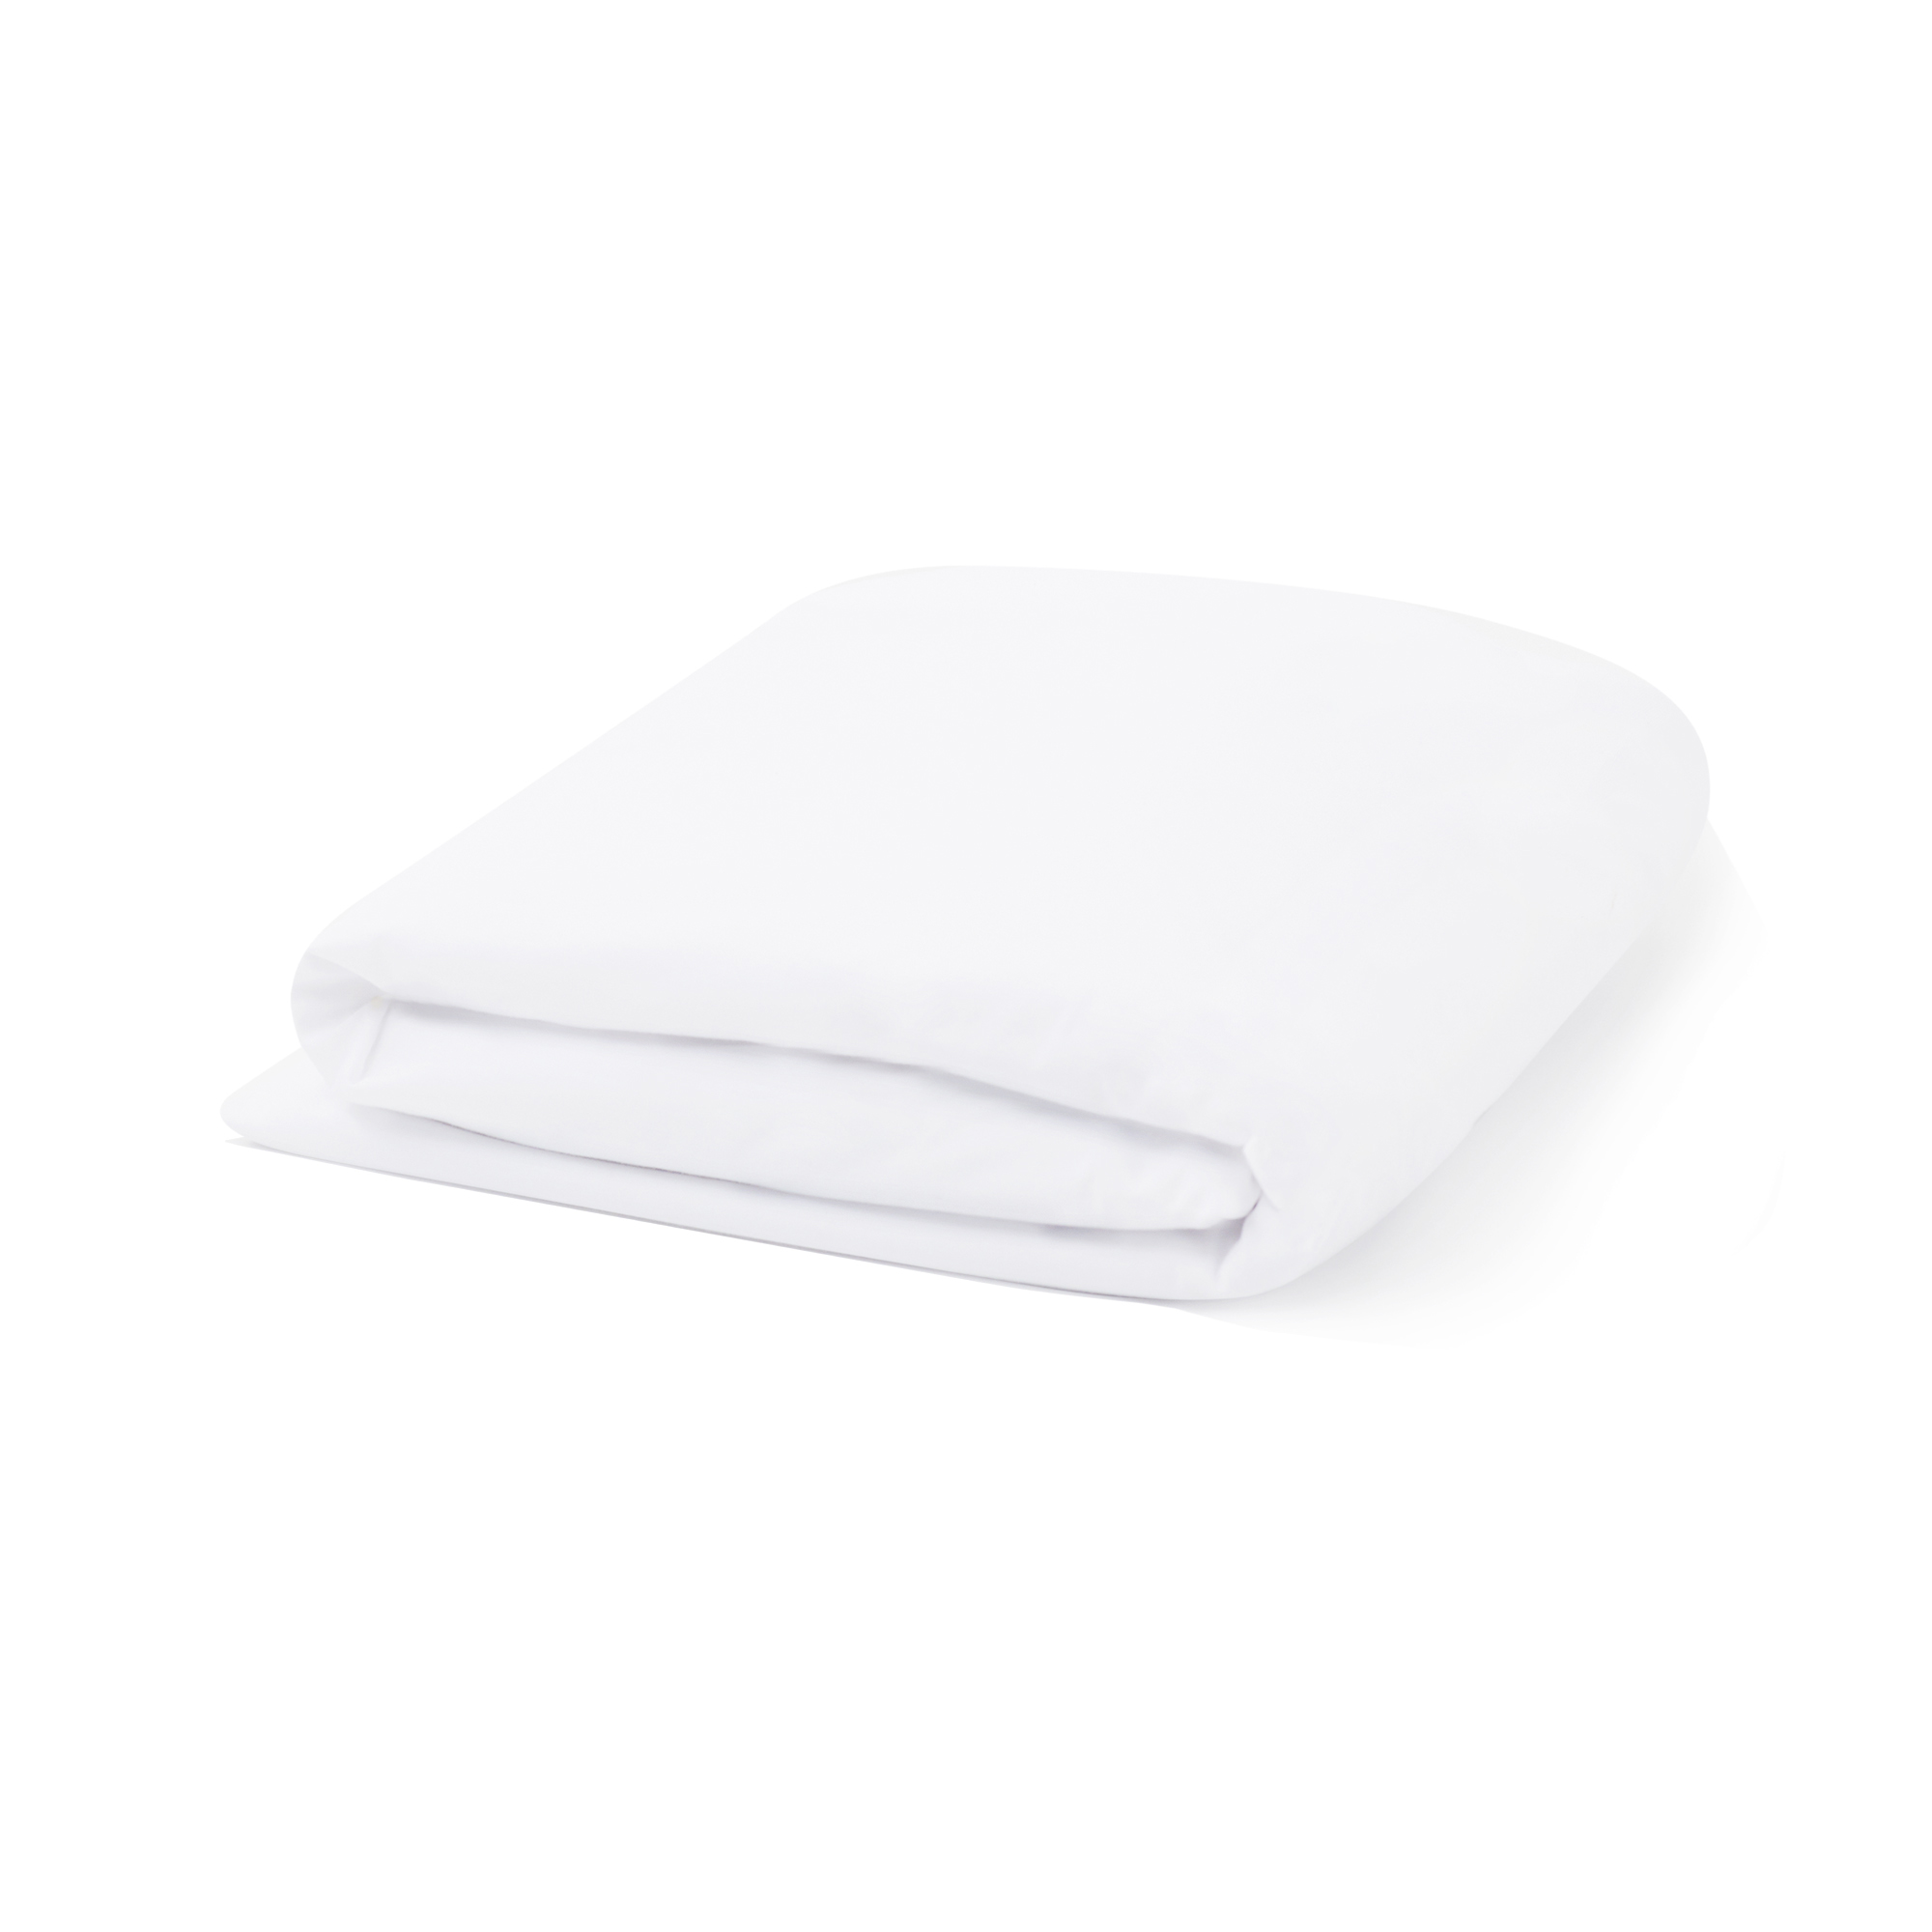 Linenspa Five Sided Waterproof Mattress Protector, Color: White